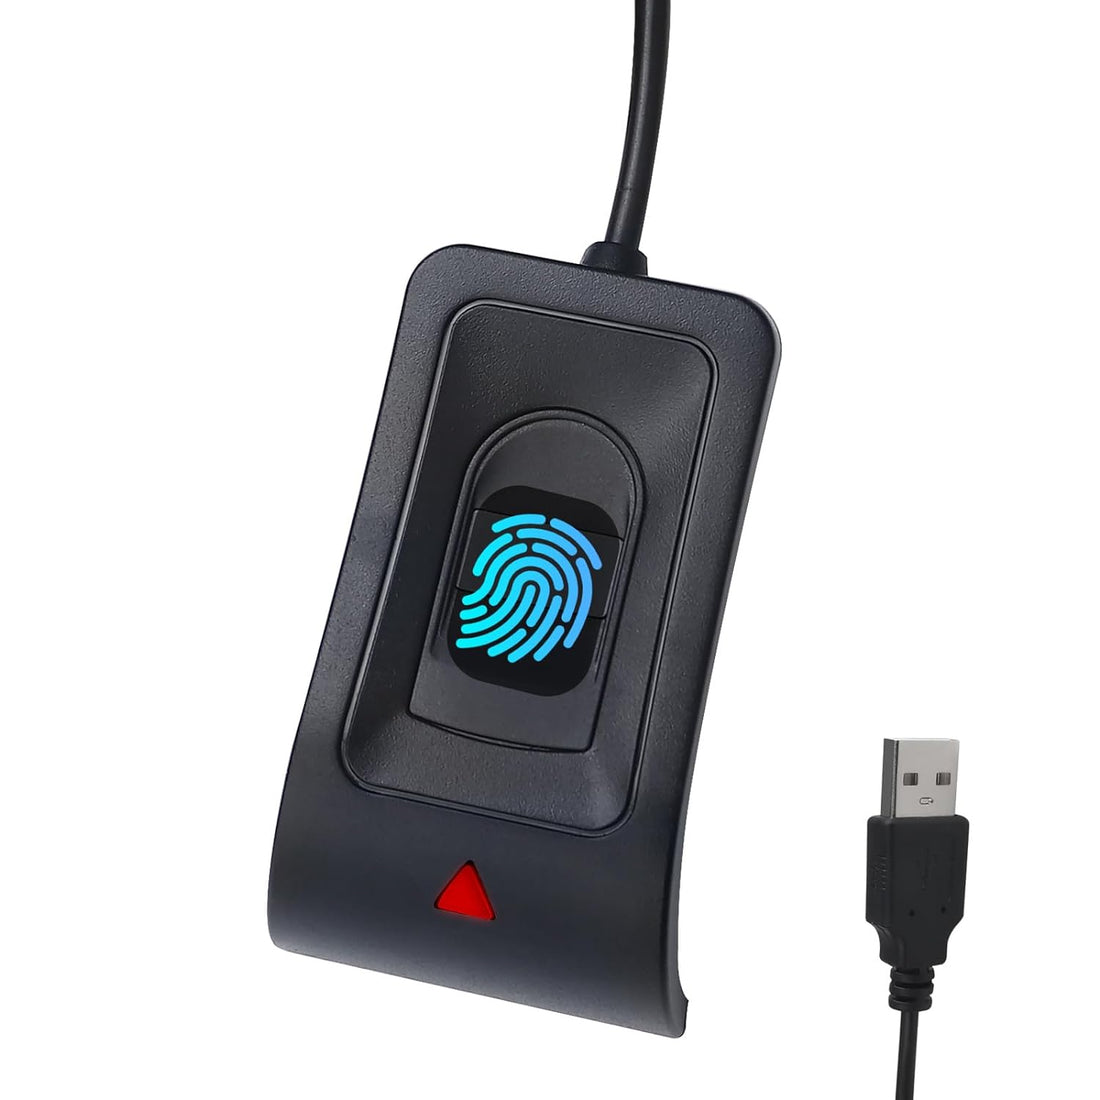 JIANBOLAND USB Fingerprint Reader Fingerprint for Windows10/11, Windows Hello Plug-and-Play Automatic Driver Installation with 5ft Extension Cable-Windows Password Free Operation